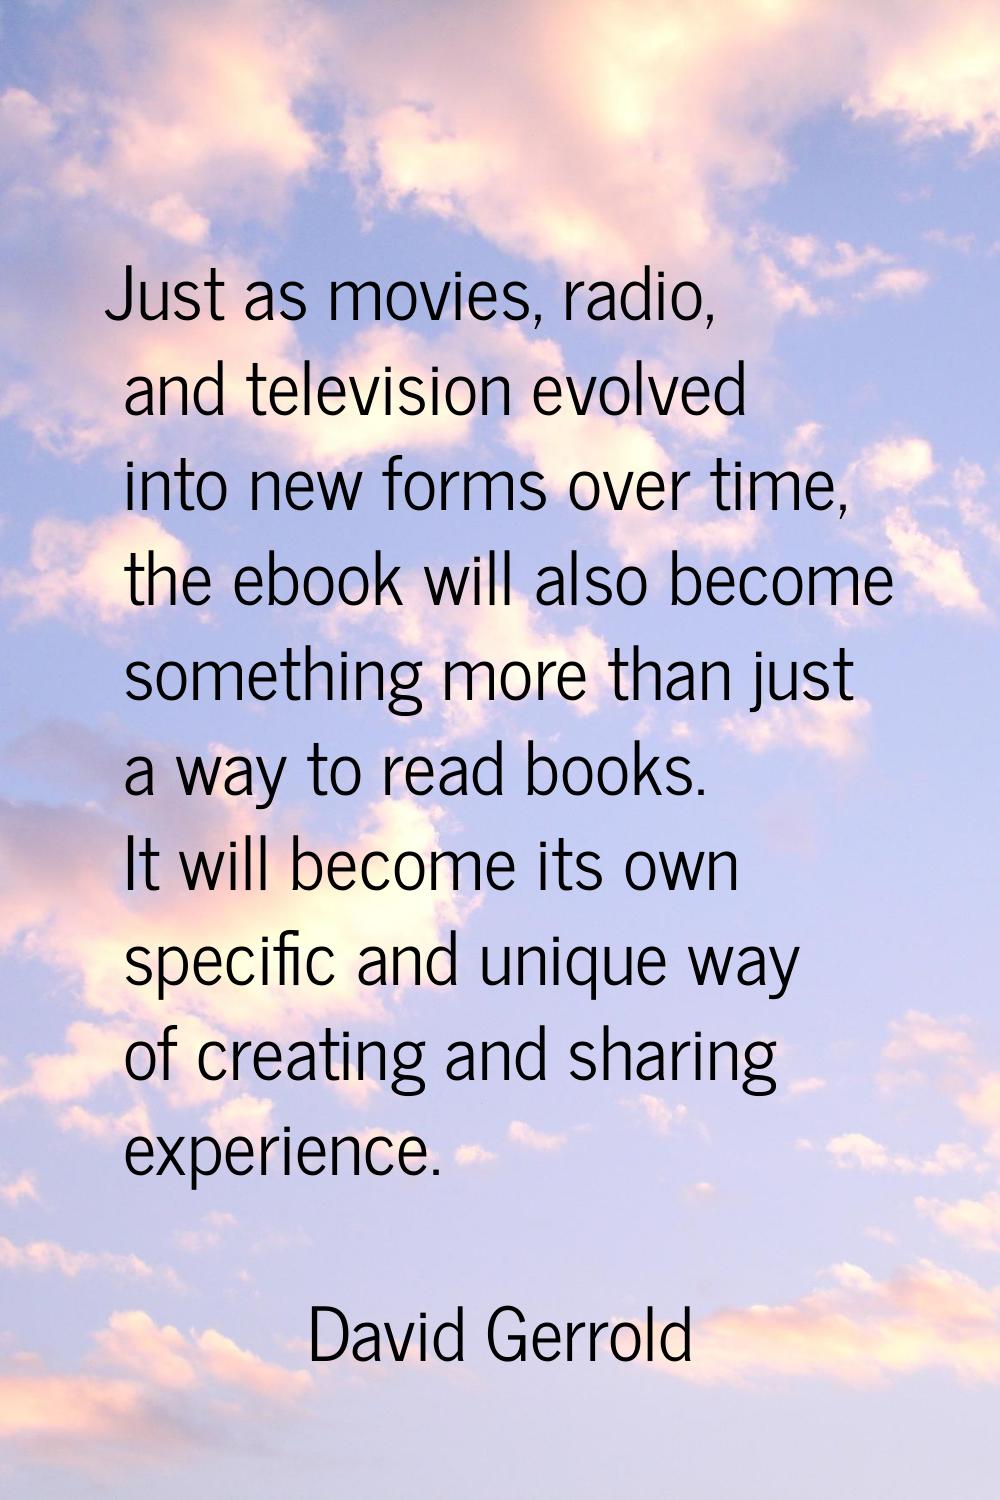 Just as movies, radio, and television evolved into new forms over time, the ebook will also become 